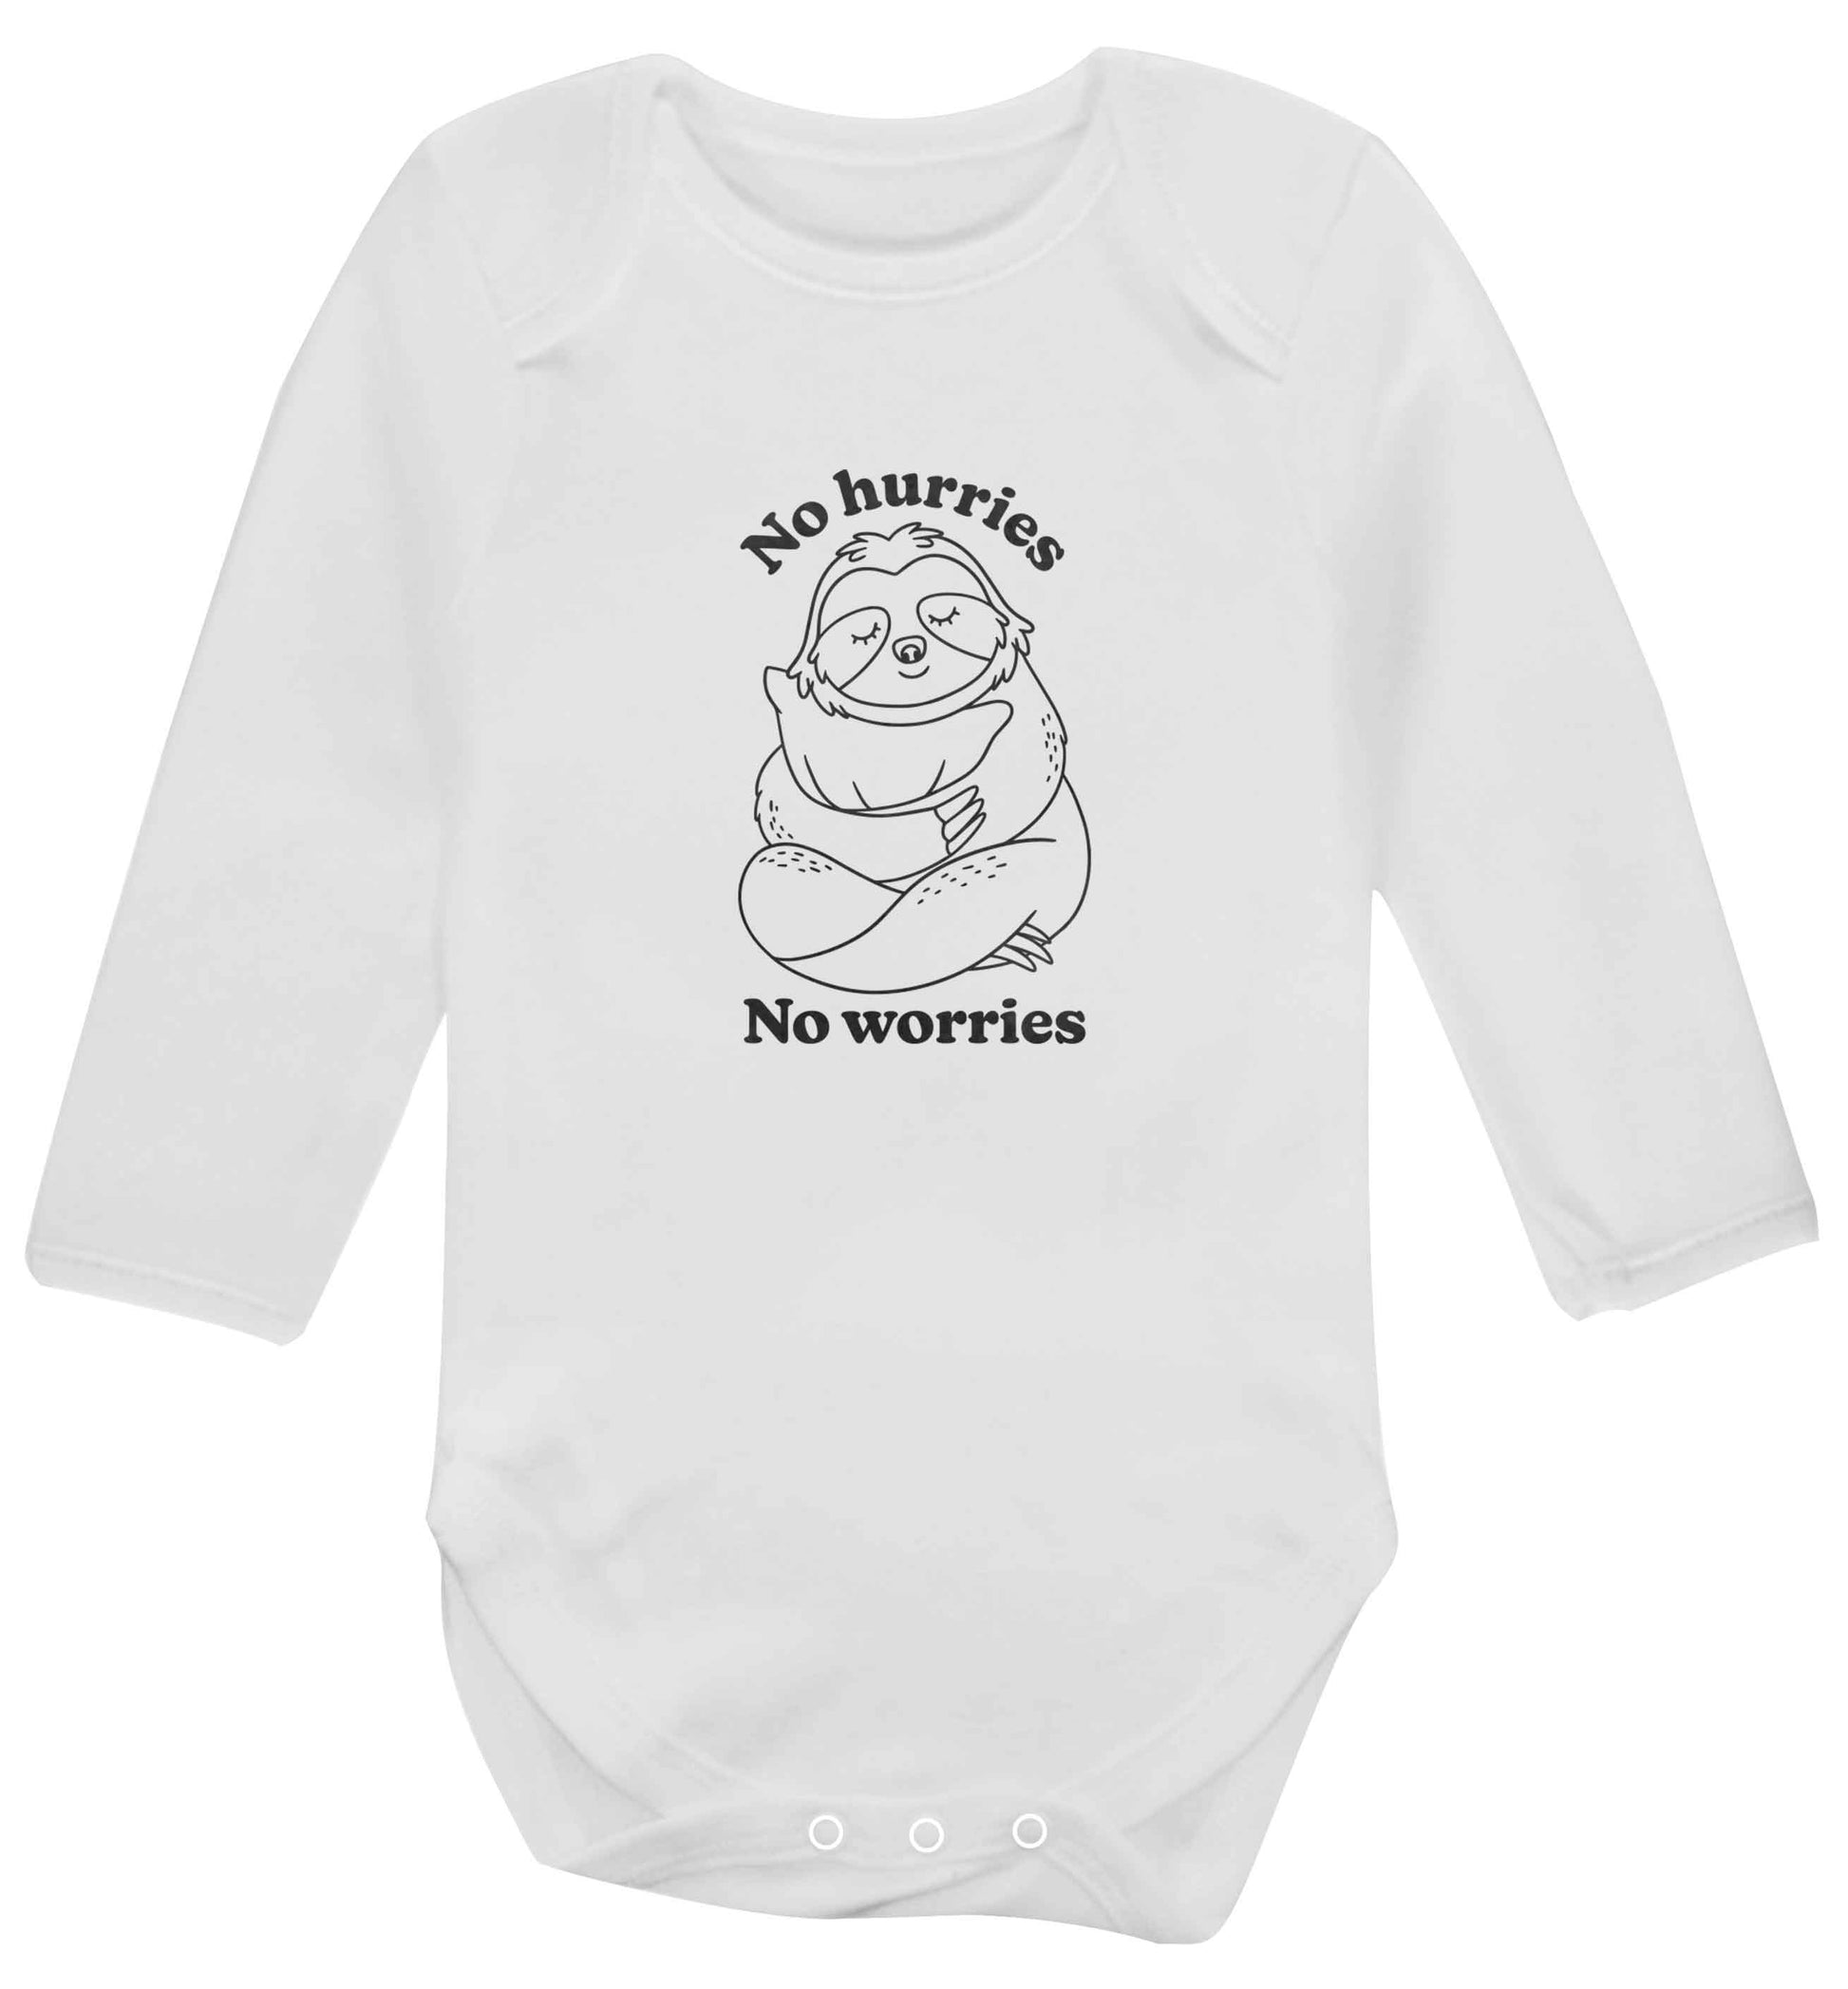 No hurries no worries baby vest long sleeved white 6-12 months